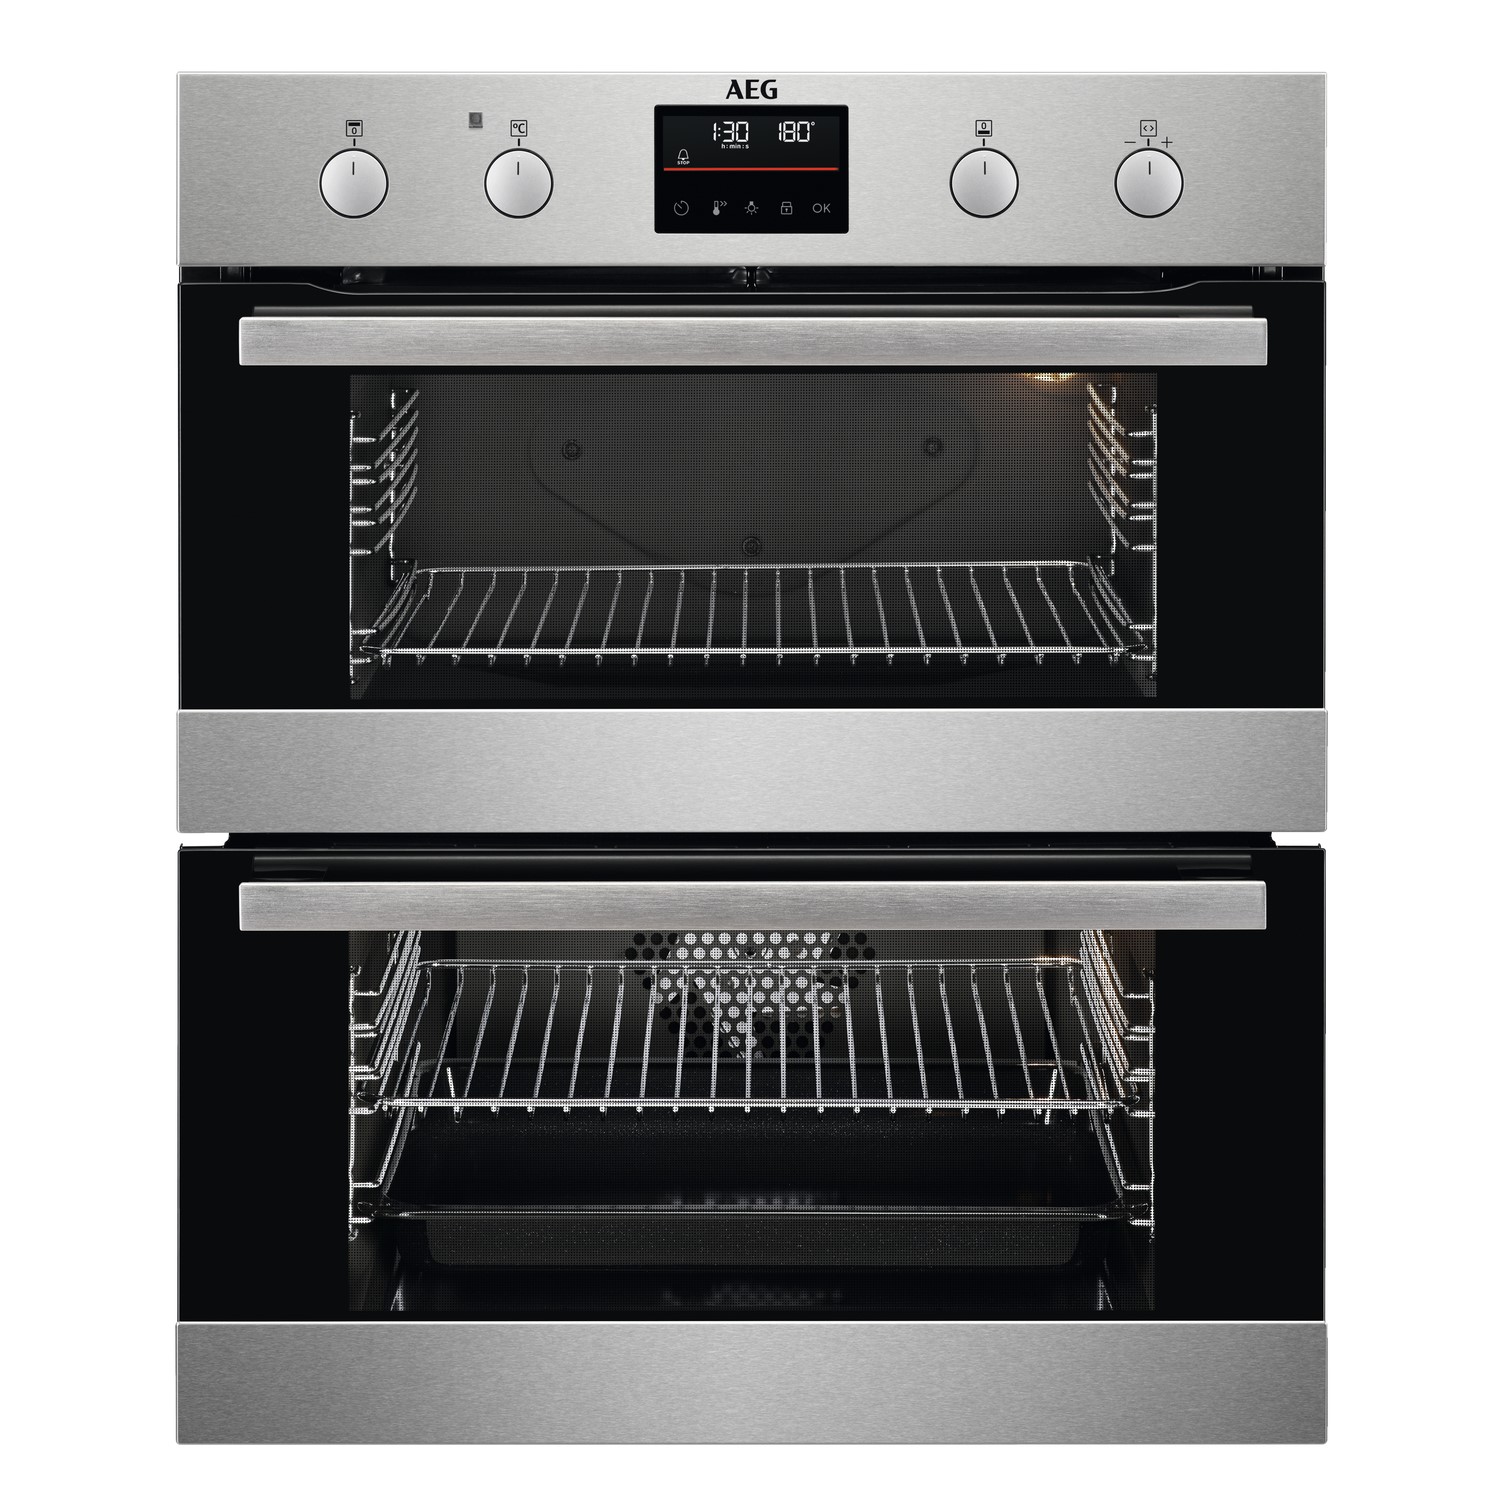 Photos - Other for Computer AEG Series 6000 Built Under Electric Double Oven - Stainless Steel 9441717 